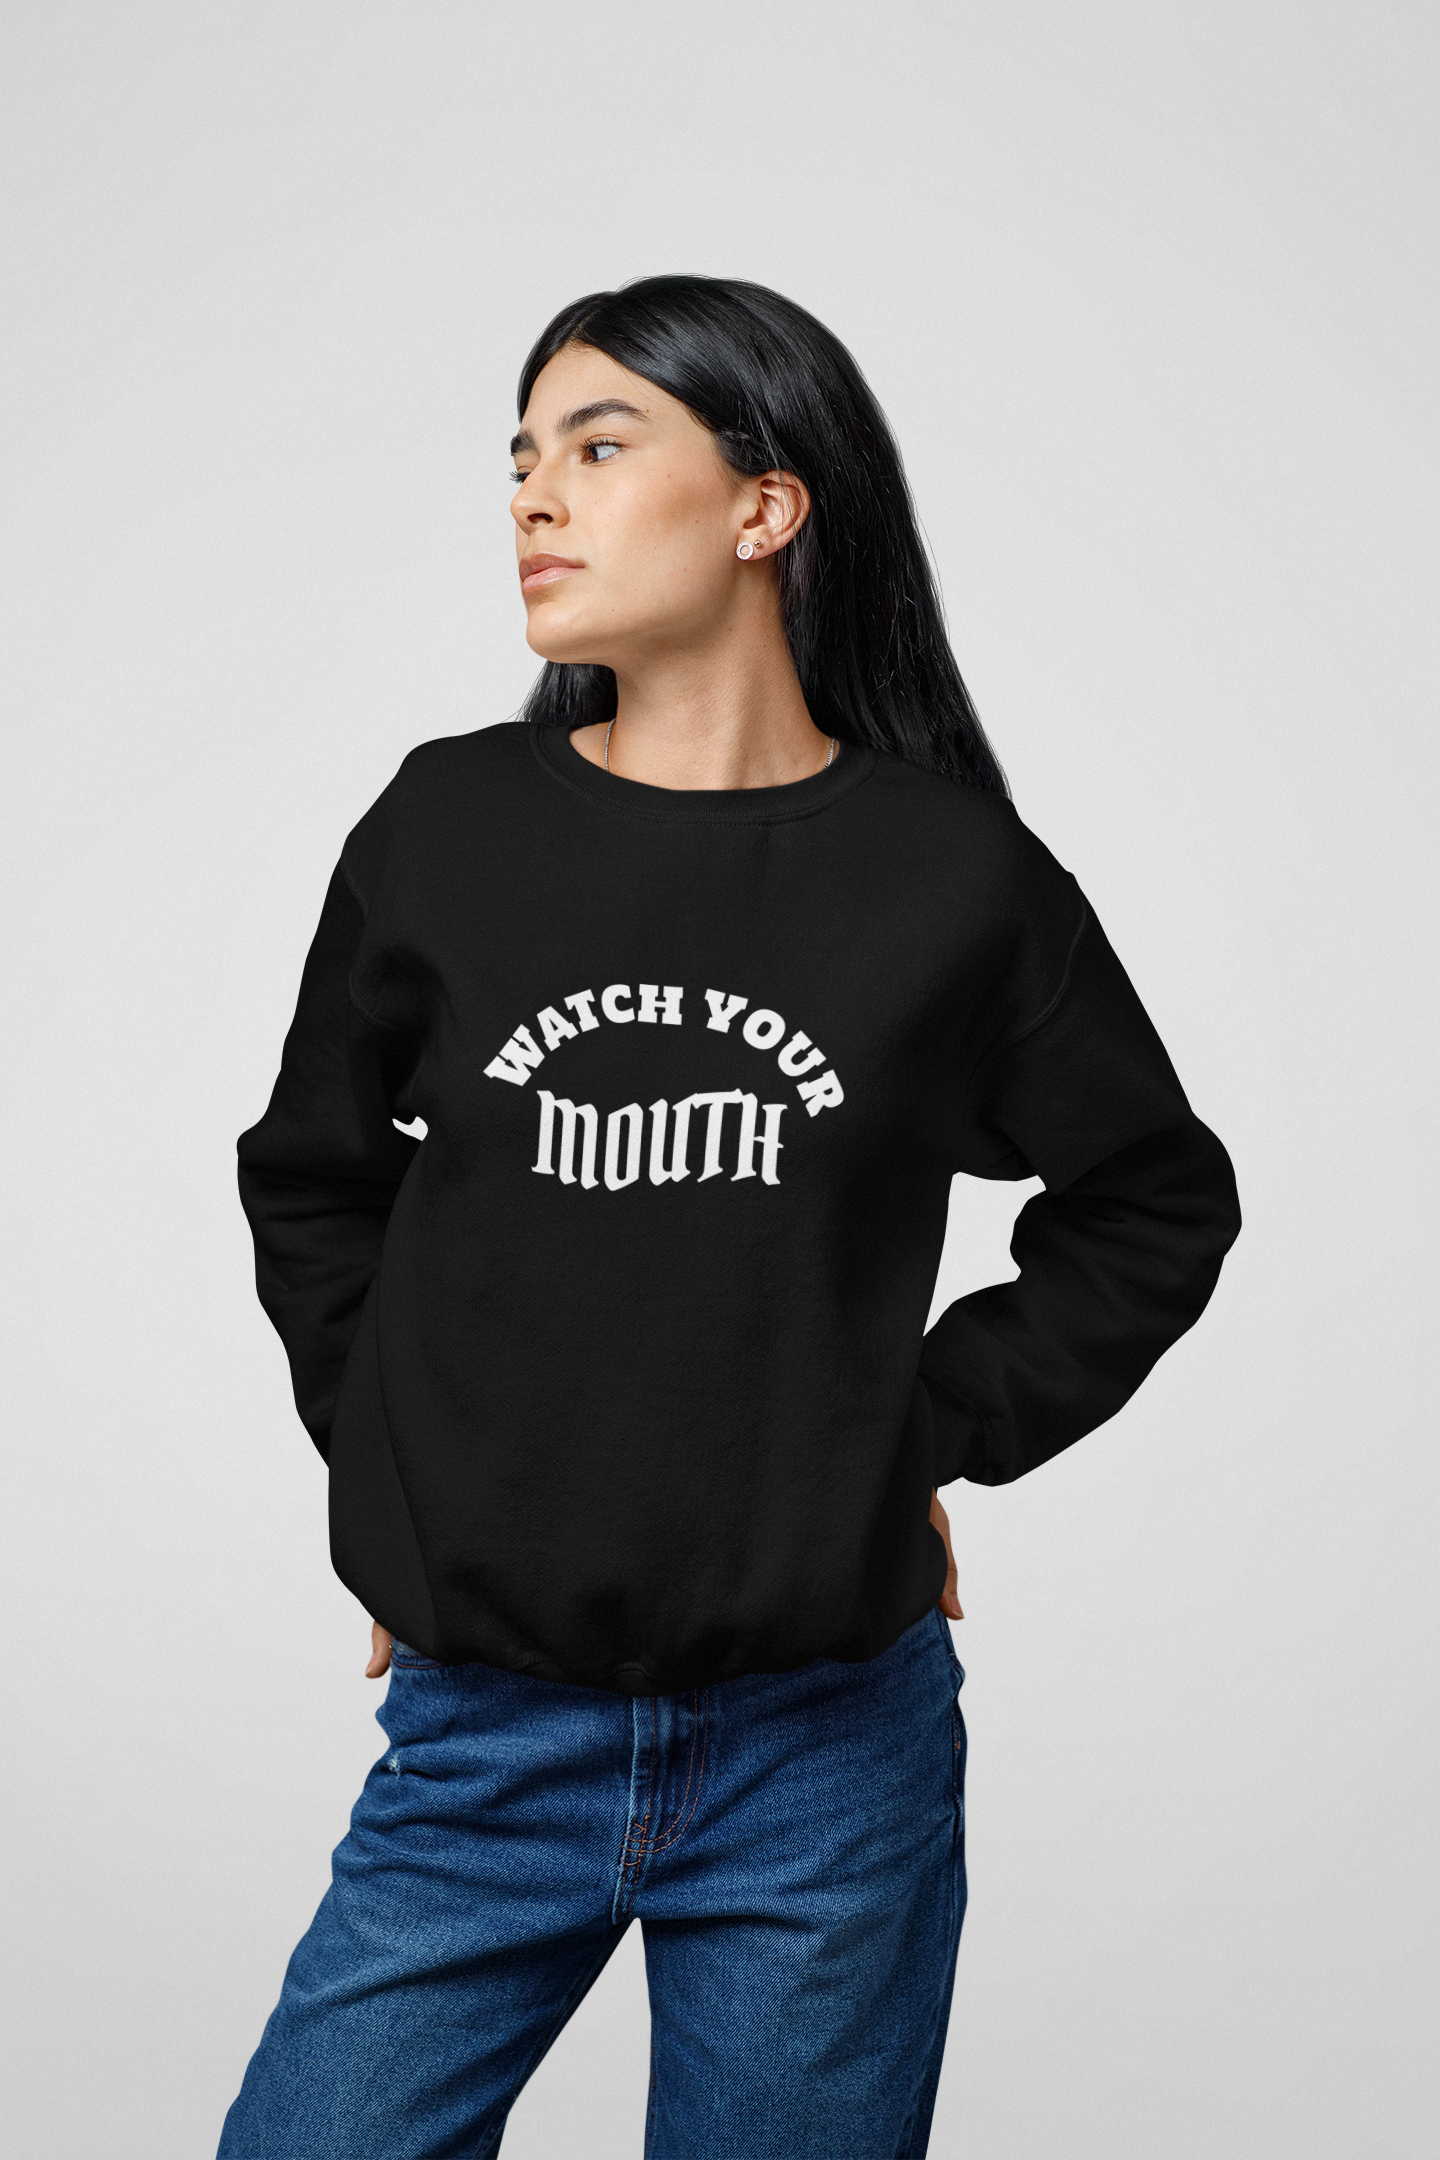 SWEATSHIRTS BLACK: WATCH YOUR MOUTH